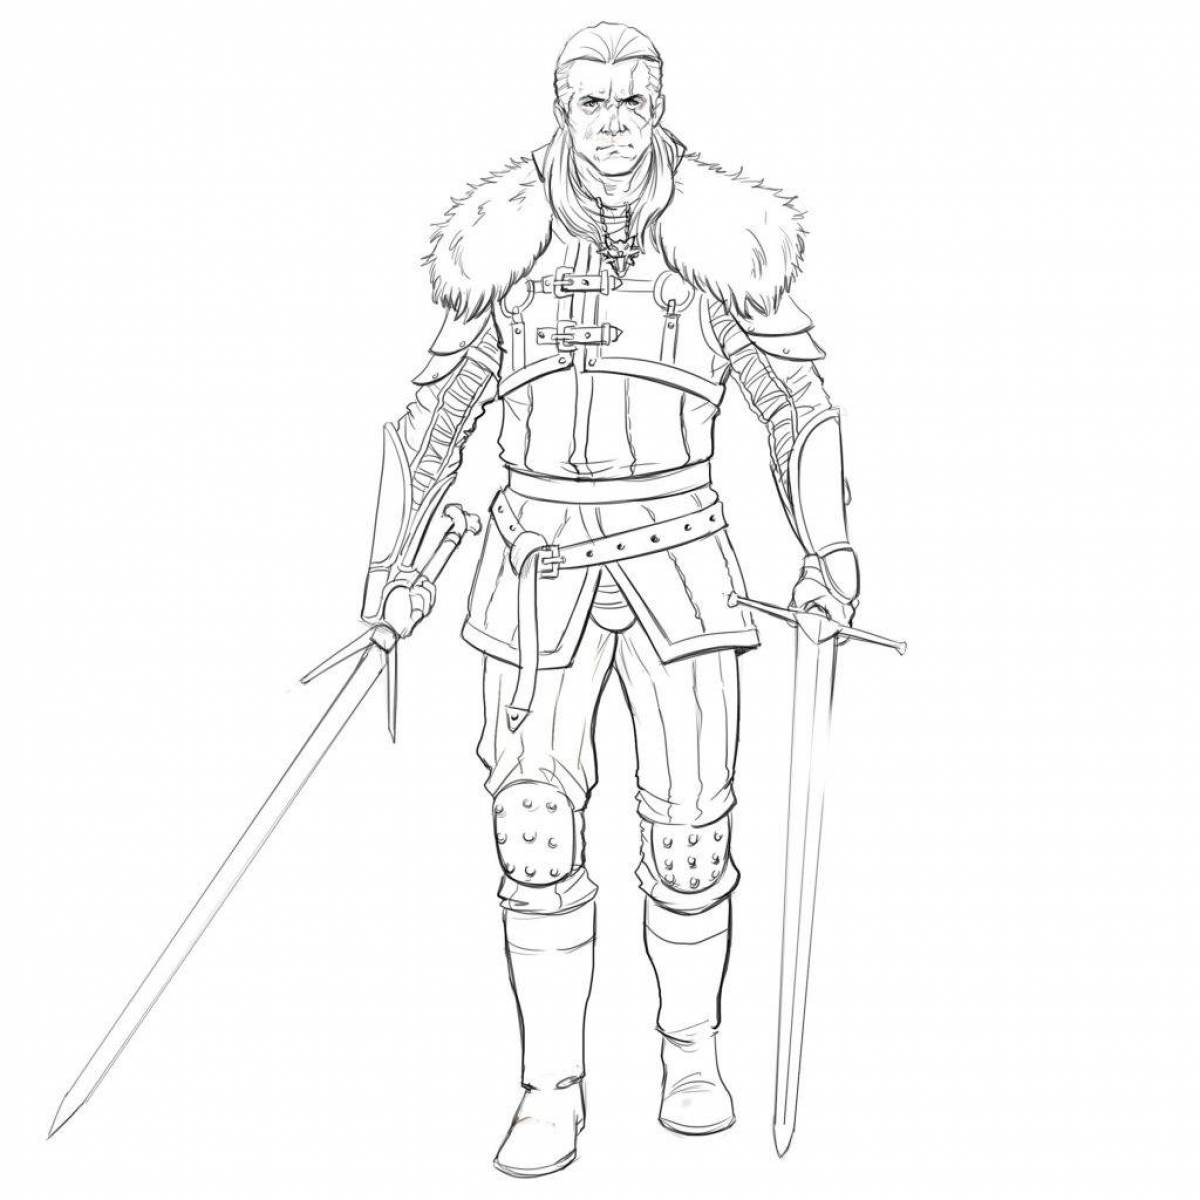 Witcher marvelous coloring book